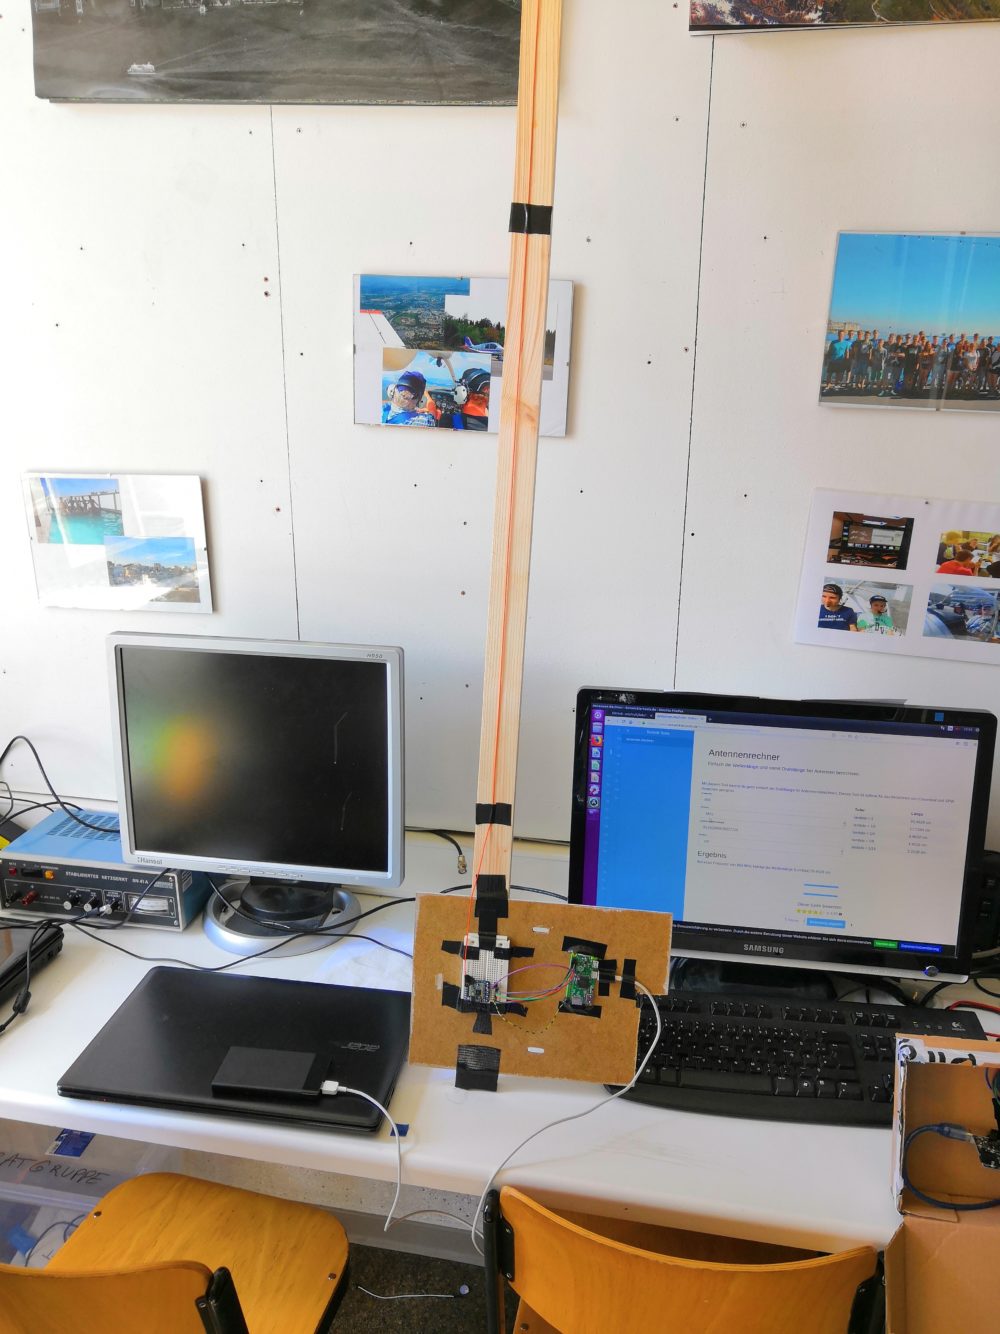 The radio transmitter that will launch together with the high altitude balloon